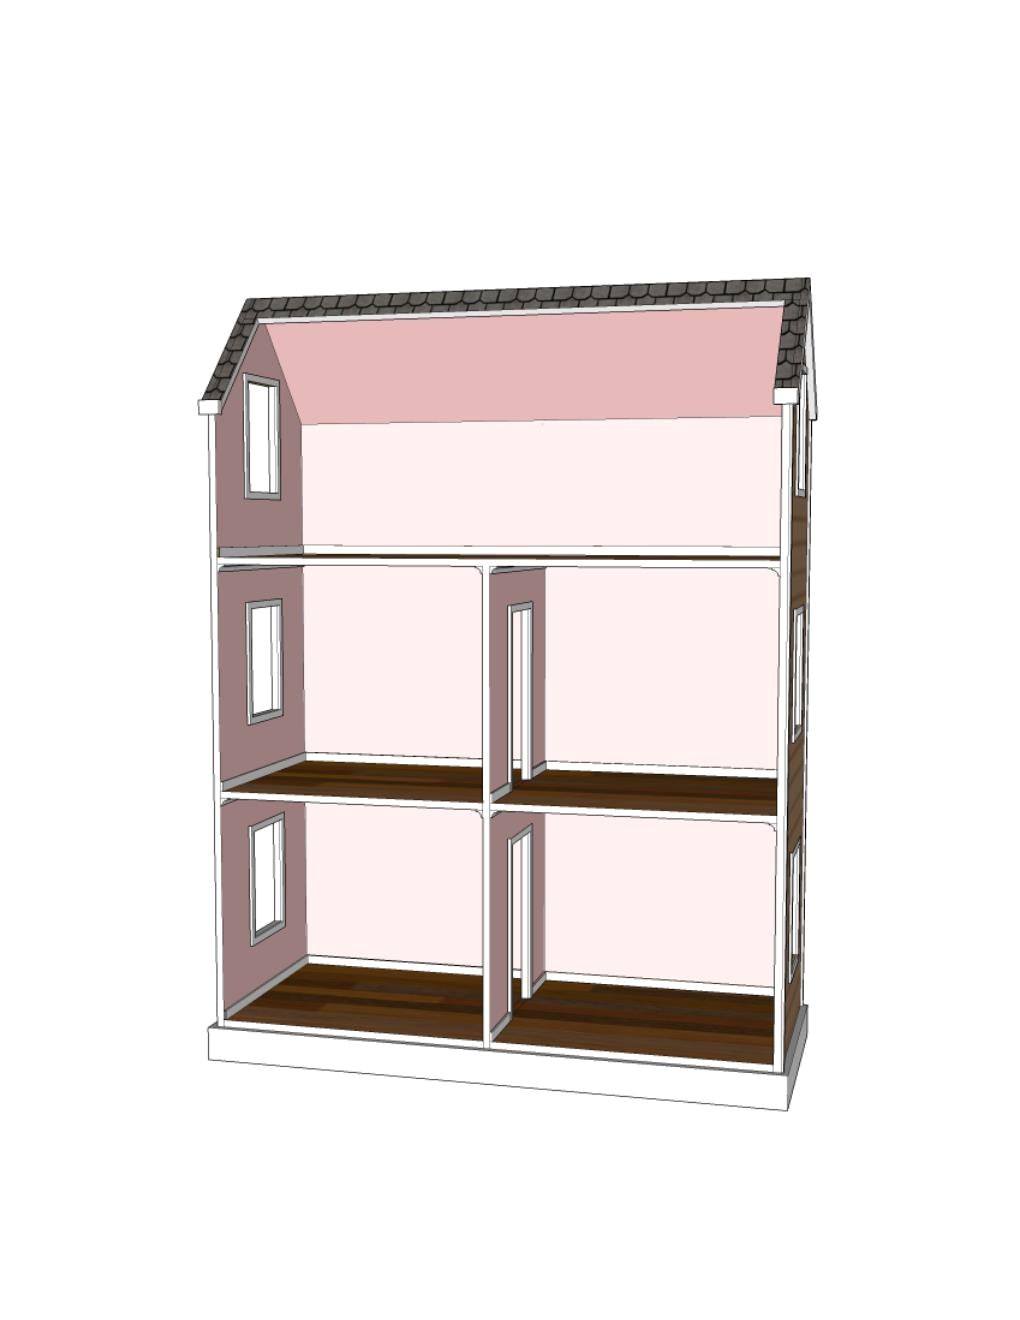 Building Plans for 18 Inch Doll House Doll House Plans for American Girl or 18 Inch Dolls 5 Room